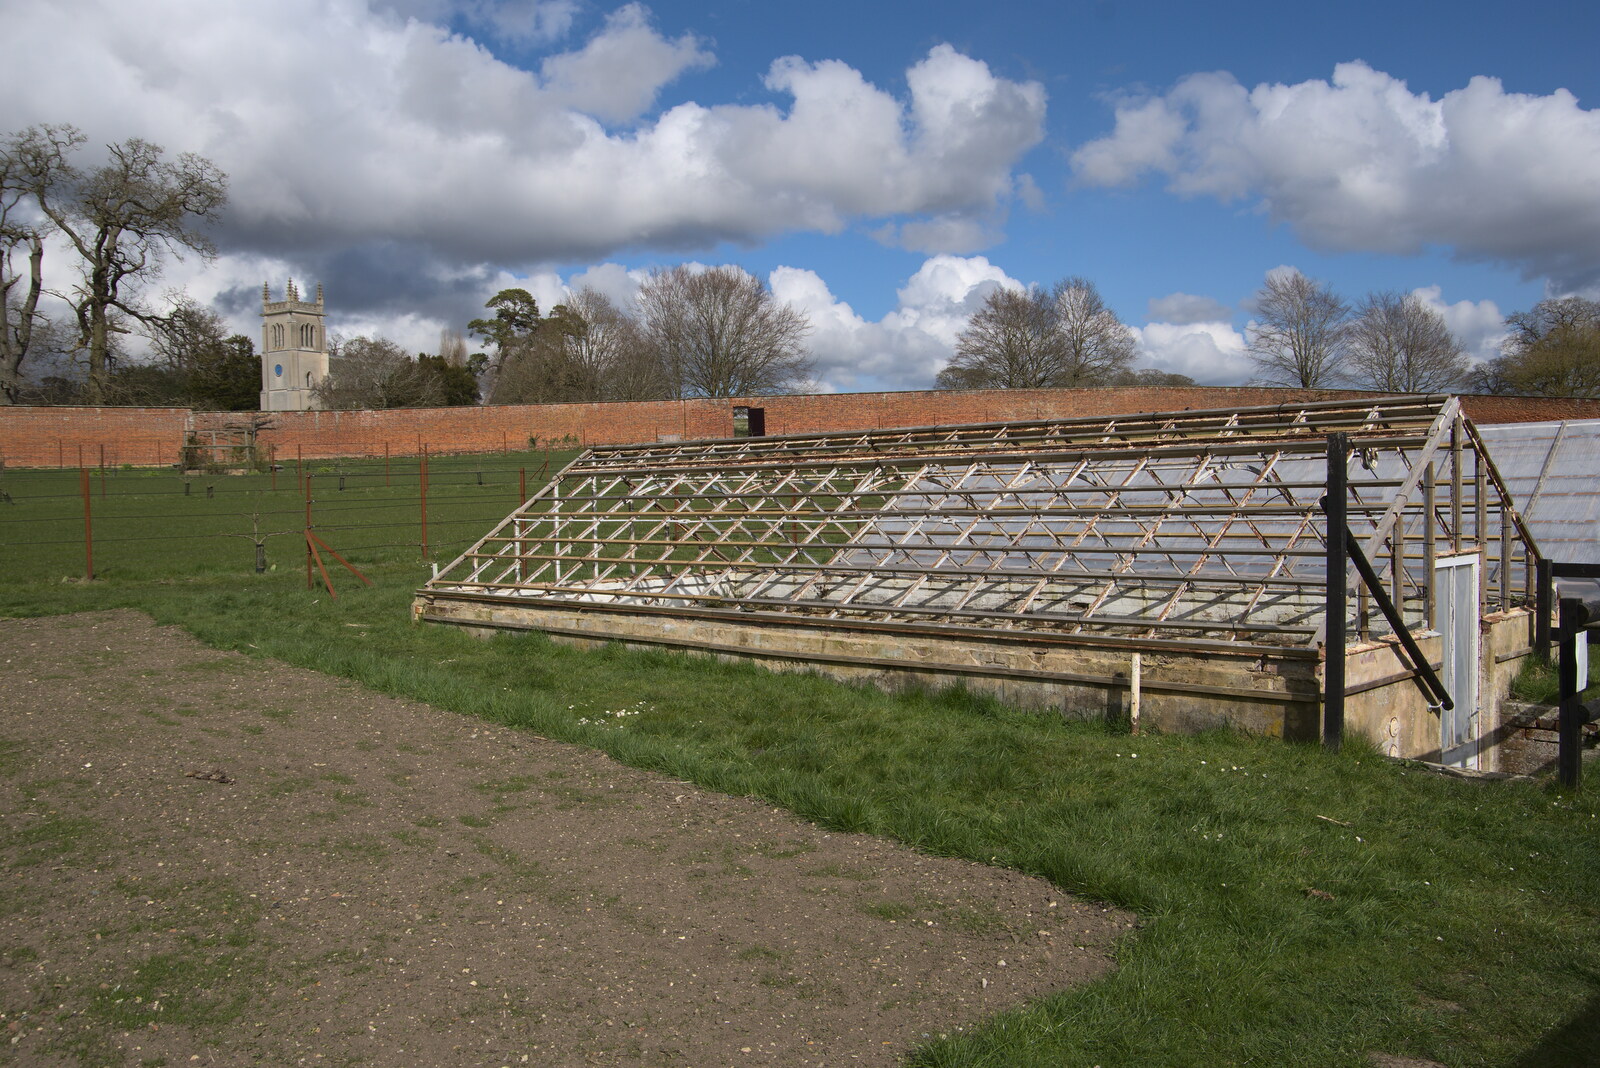 More derelict greenhouses from A Return to Ickworth House, Horringer, Suffolk - 11th April 2021